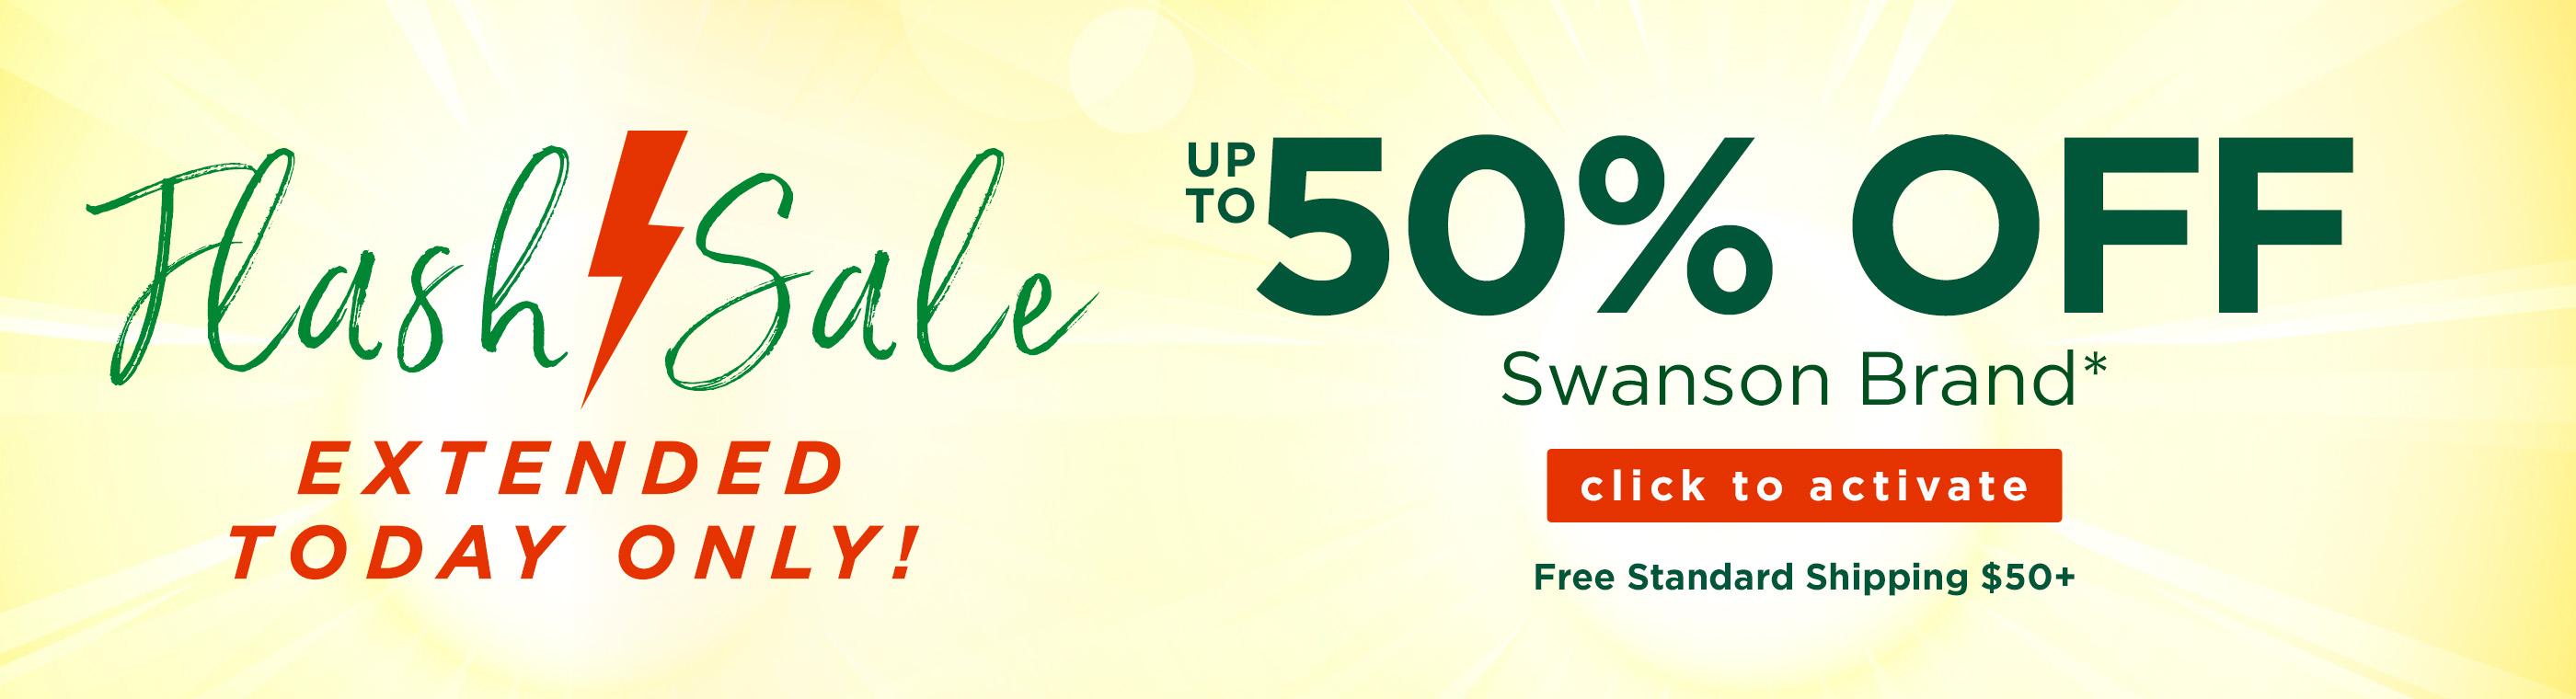 Up to 50% off Swanson Brand